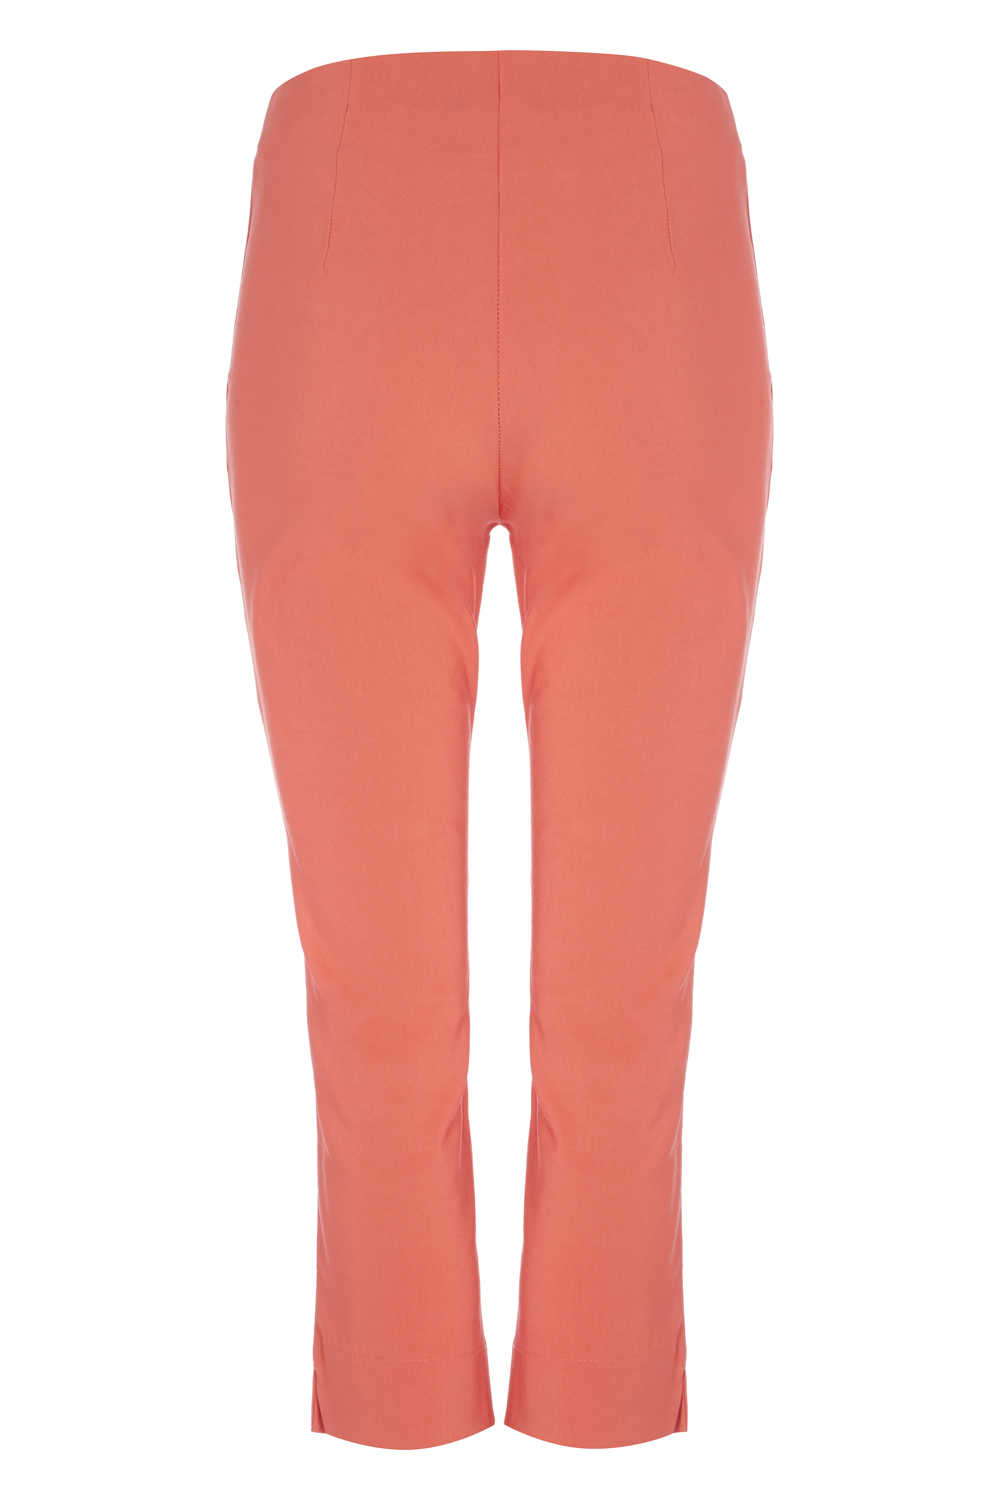 CORAL Bengaline Cropped Trousers, Image 4 of 5